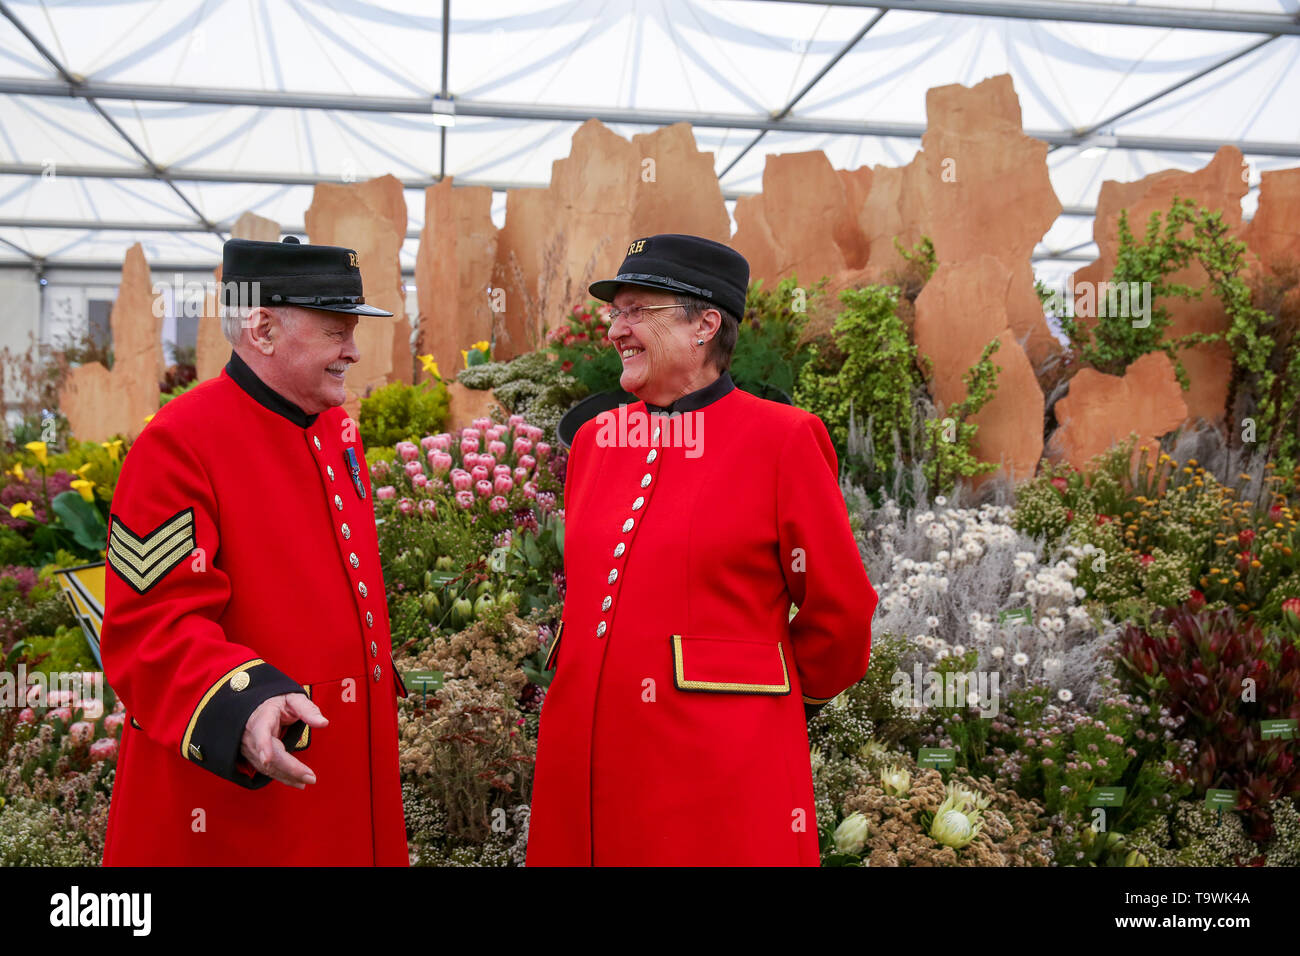 May 20, 2019 - London, United Kingdom - Two Chelsea Pensioners seen during the Chelsea Flower Show..The Royal Horticultural Society Chelsea Flower Show is an annual garden show over five days in the grounds of the Royal Hospital Chelsea in West London. The show is open to the public from 21 May until 25 May 2019. (Credit Image: © Dinendra Haria/SOPA Images via ZUMA Wire) Stock Photo